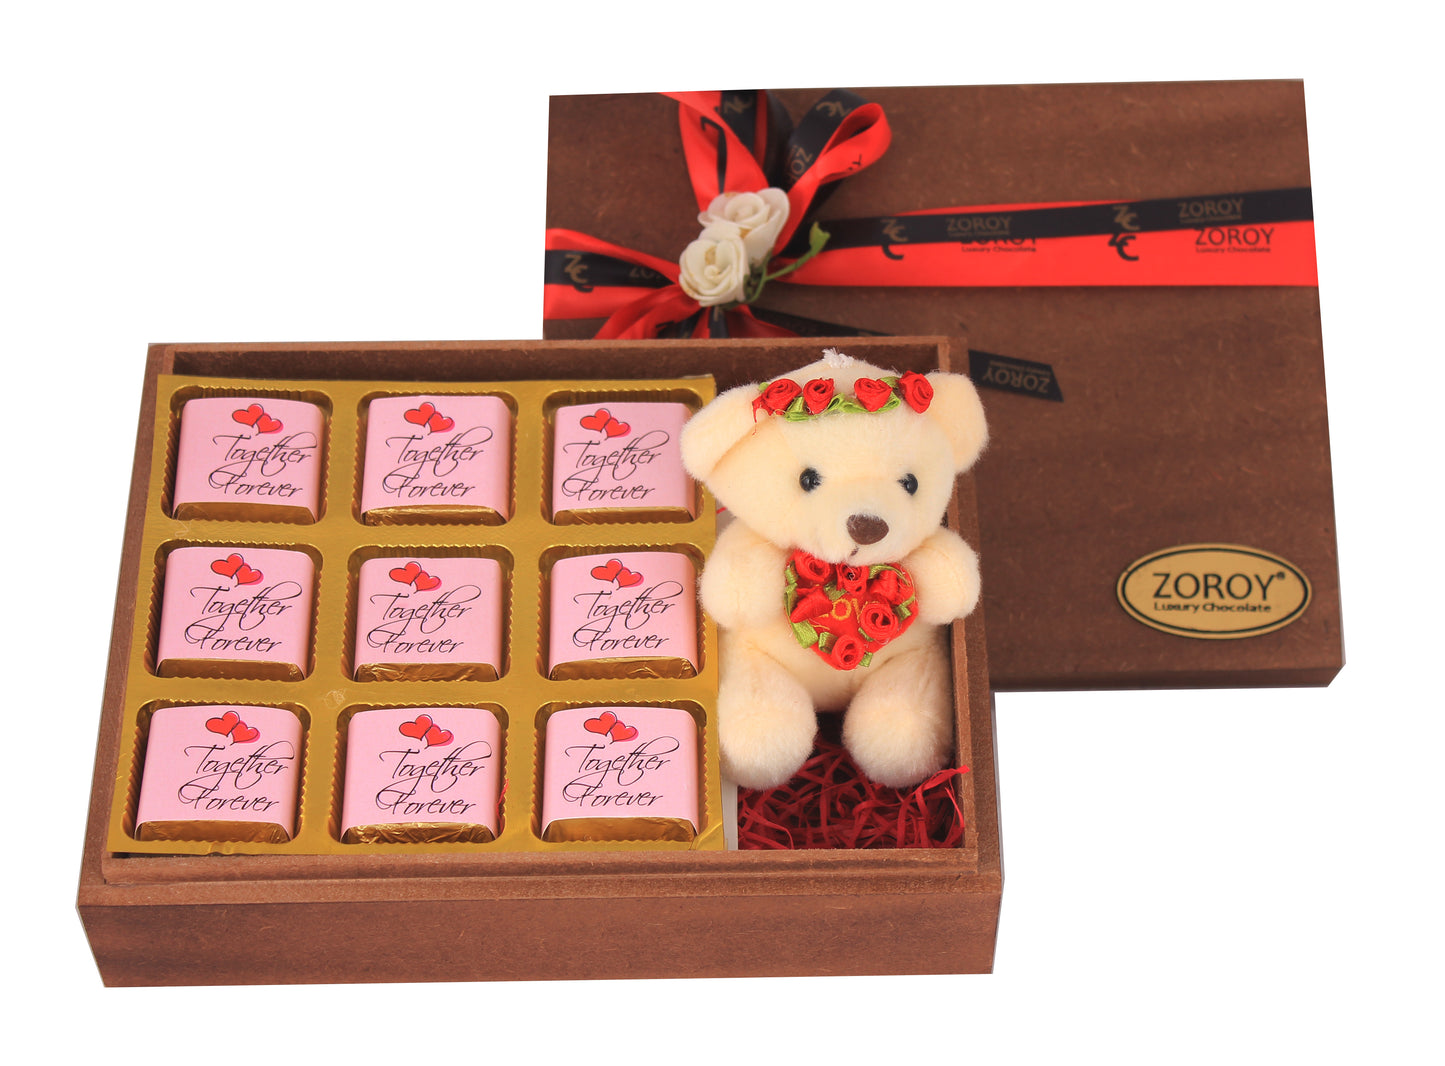 ZOROY LUXURY CHOCOLATE Valentines day Wood Box with 9 Dark chocolates and a teddy Bear Love Gift - 90gms For Girlfriend | Boyfriend Anniversary Gifts For Wife | Husband | Love Chocolates couples